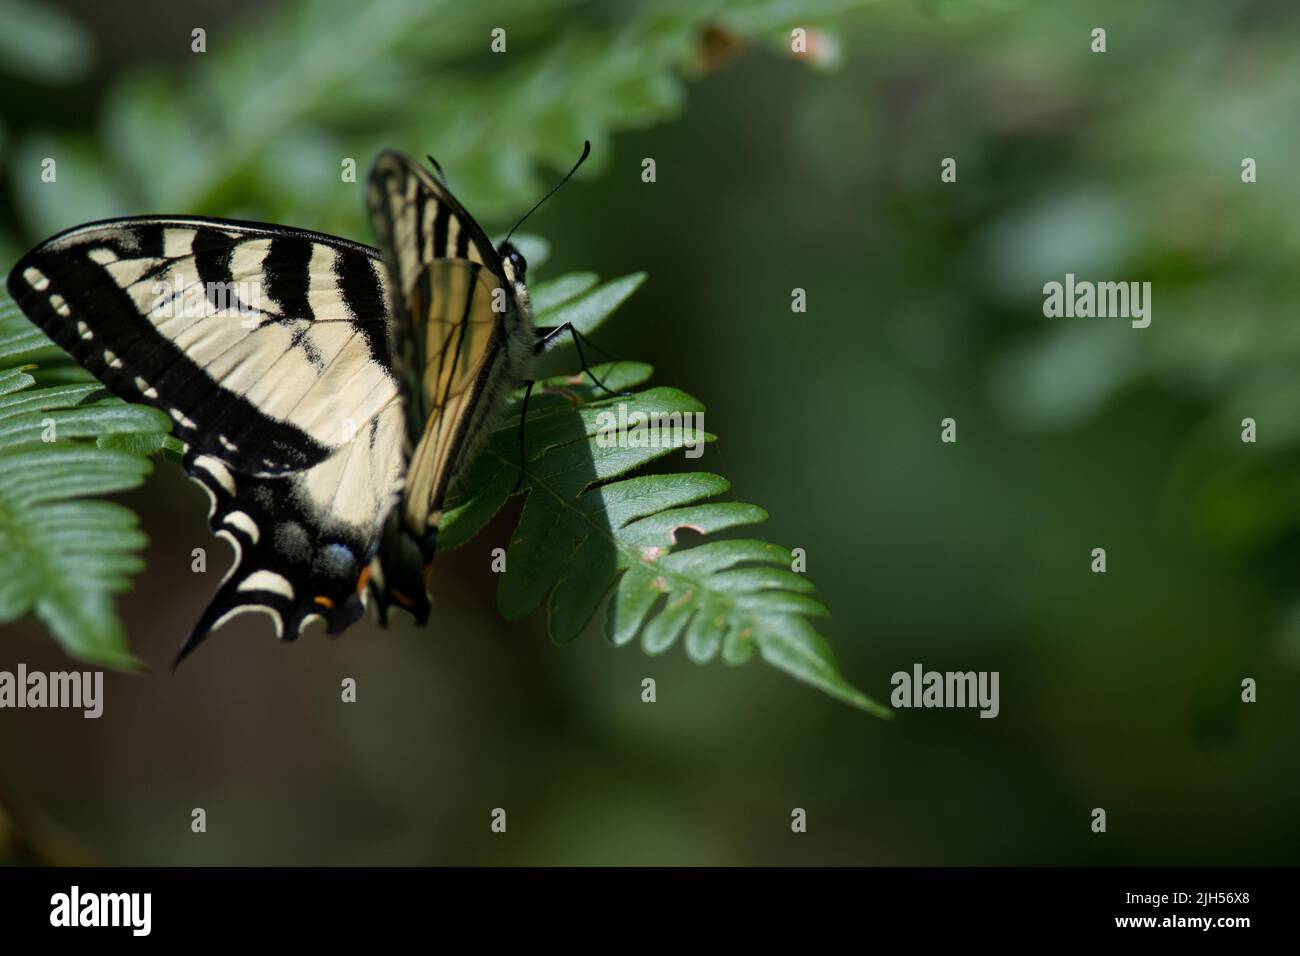 Eastern Tiger Swallowtail perched on green leaf Stock Photo